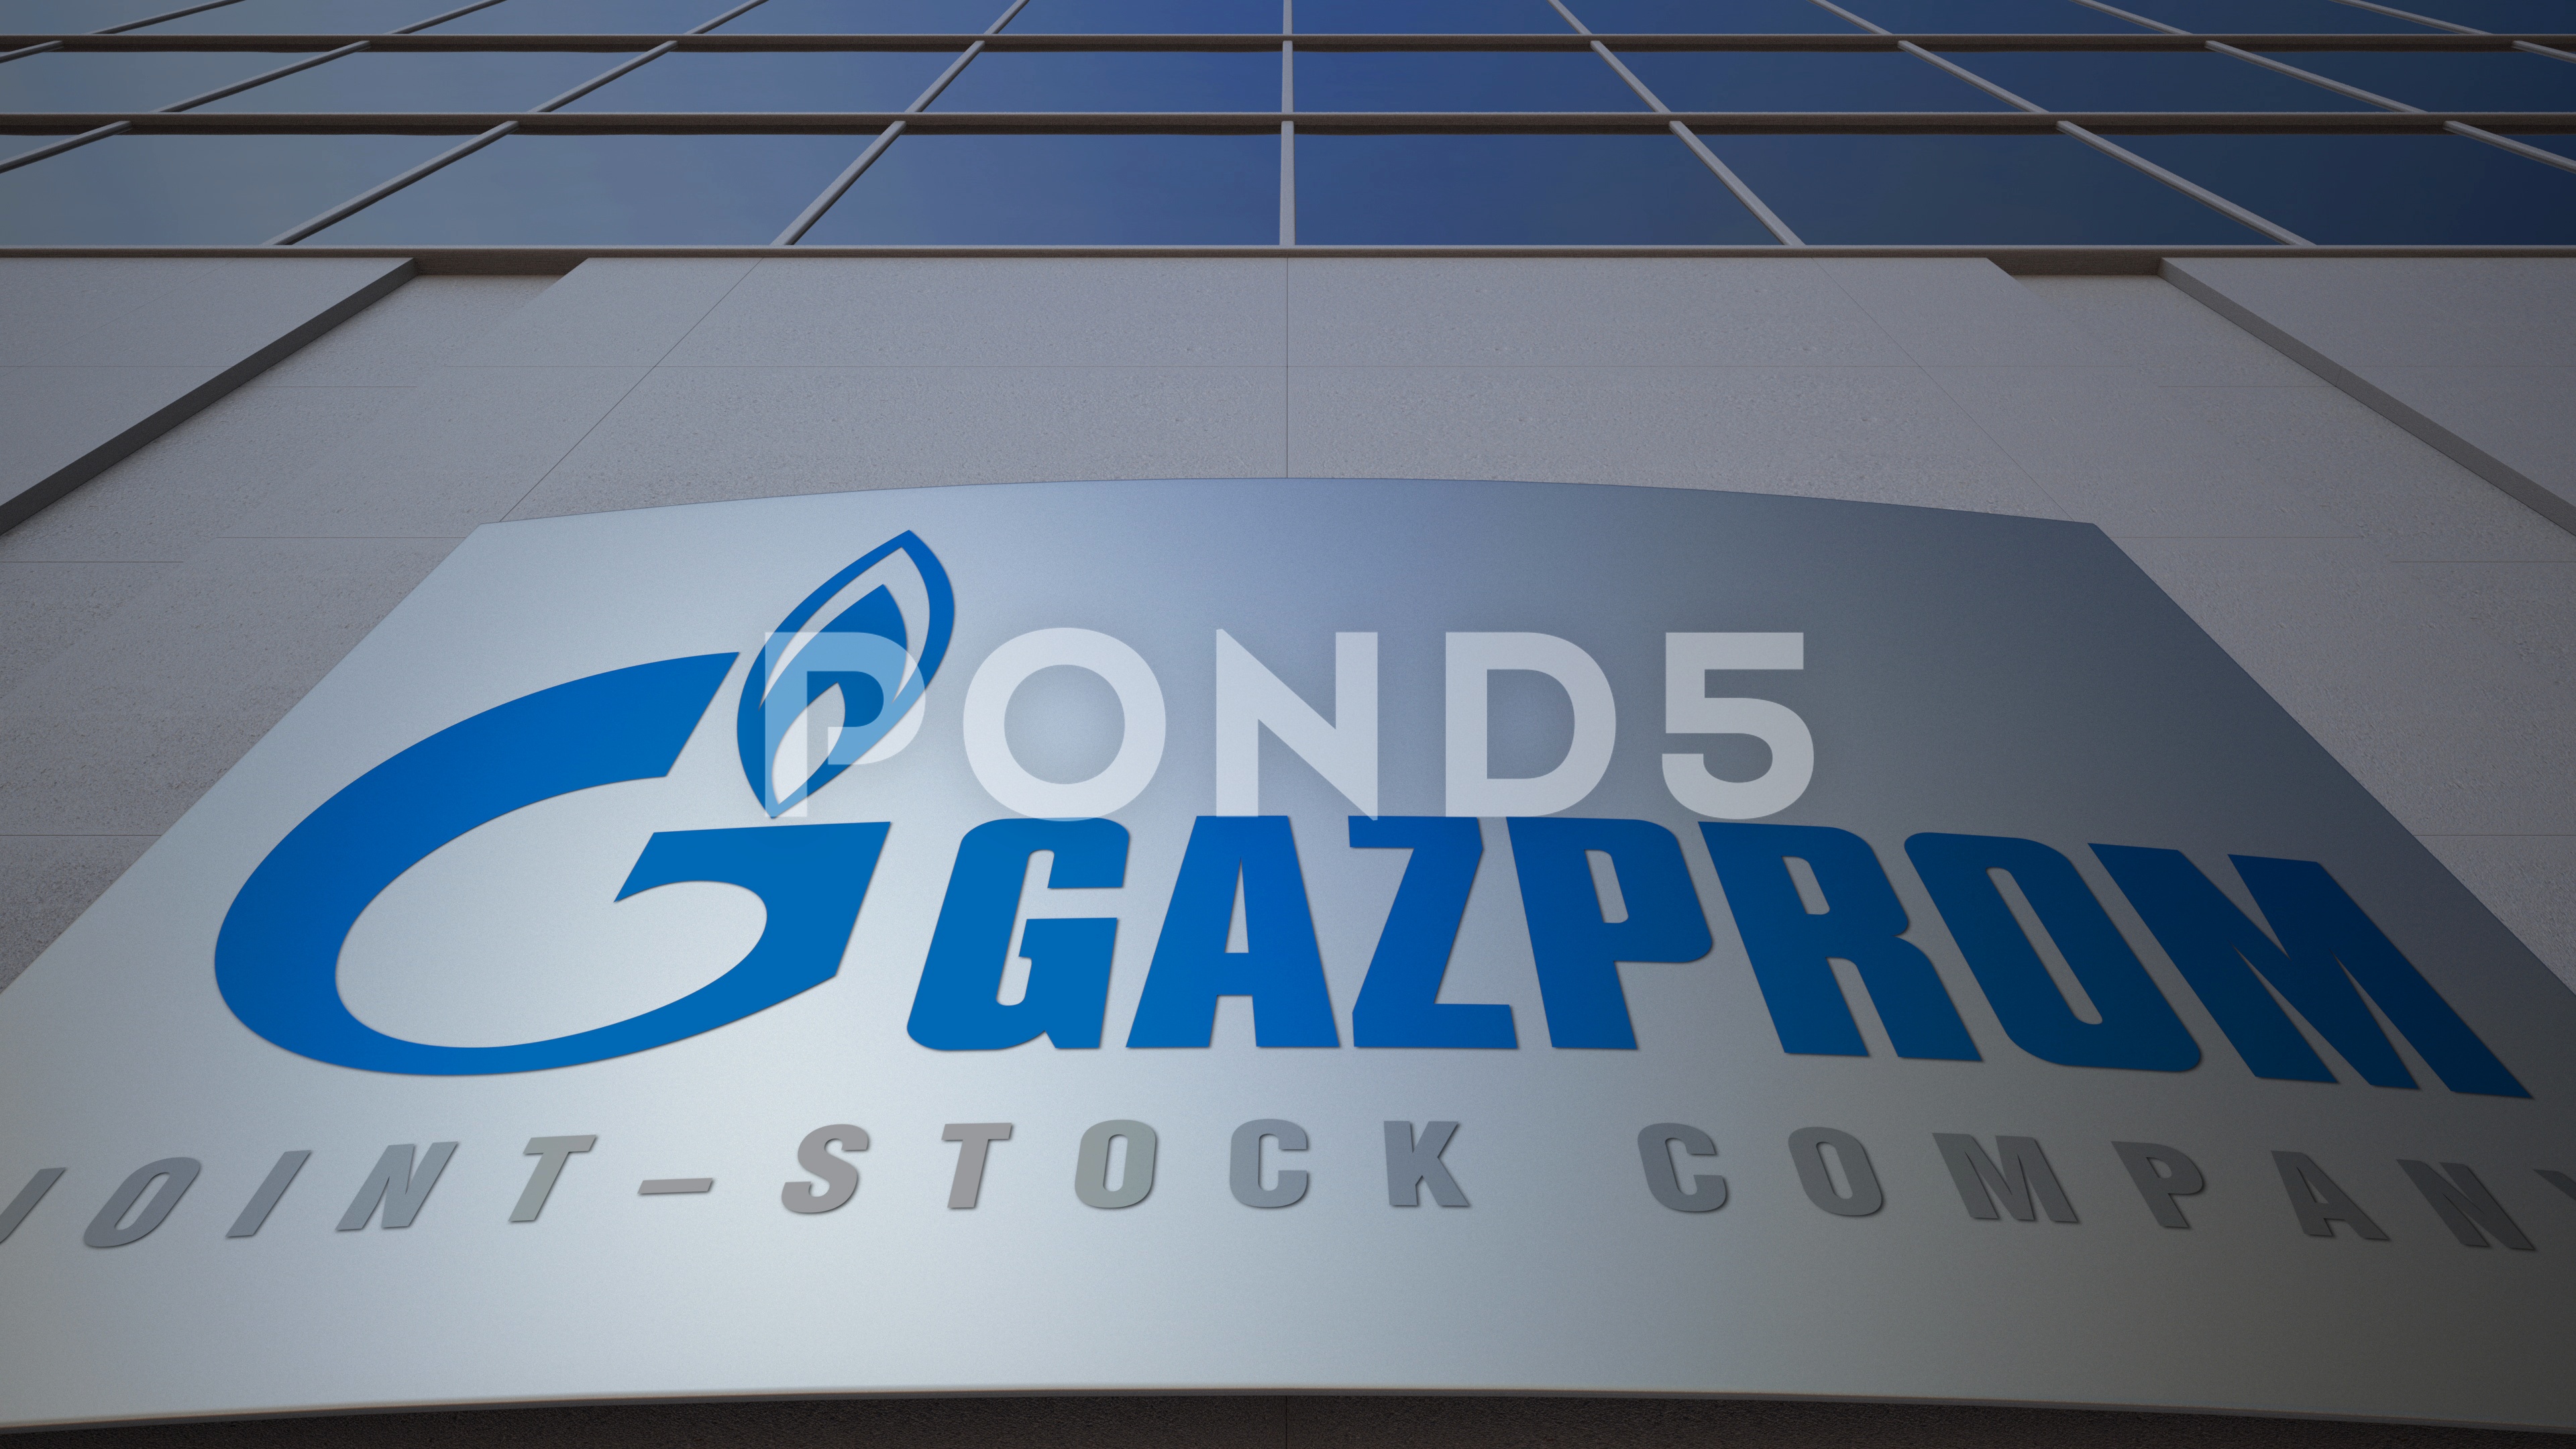 Outdoor signage board with Gazprom logo. Modern office building ...